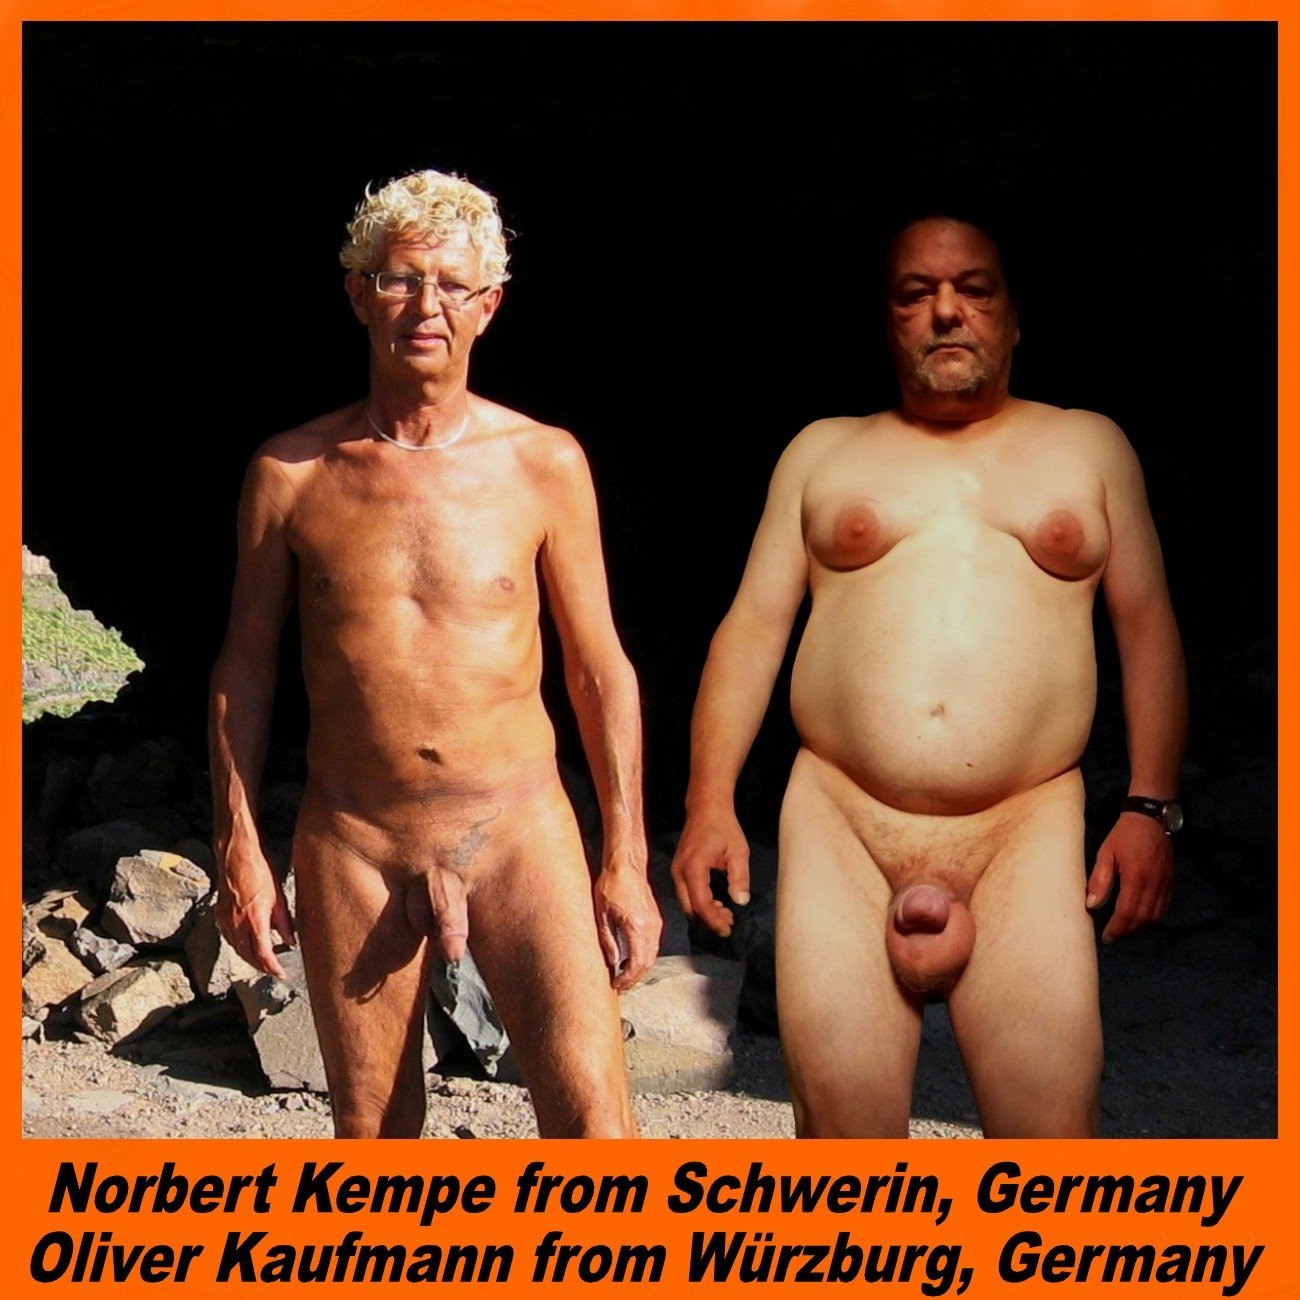 Photo by Norbert with the username @Norbert, who is a verified user,  April 18, 2020 at 3:56 AM. The post is about the topic naked by name and the text says 'Norbert Kempe and Oliver Kaufmann publicly exhibited'